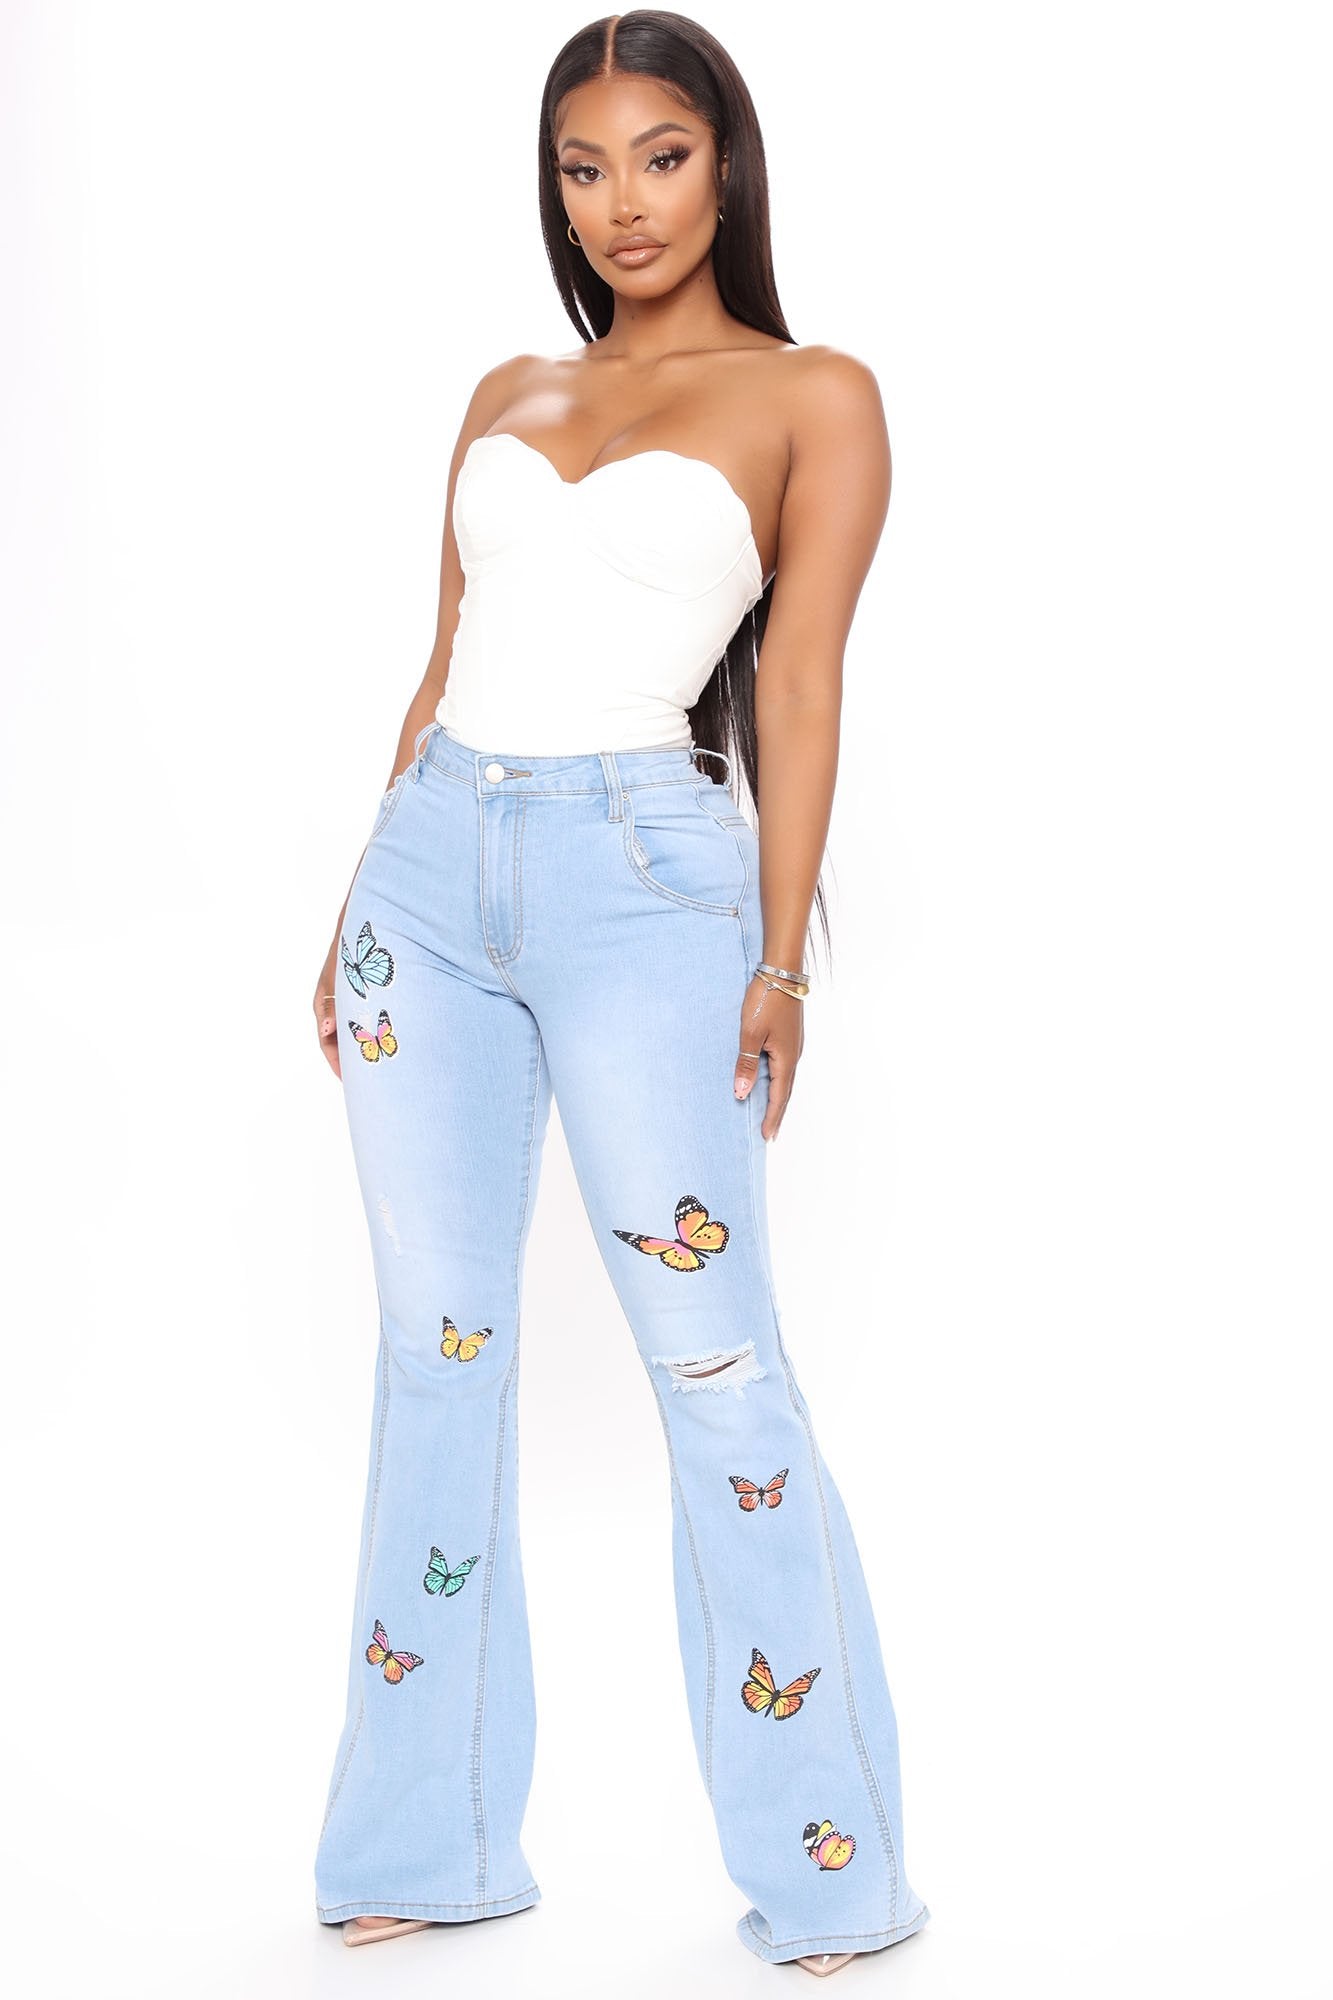 Catching Butterflies Extreme Flare Jeans - Light Blue Wash